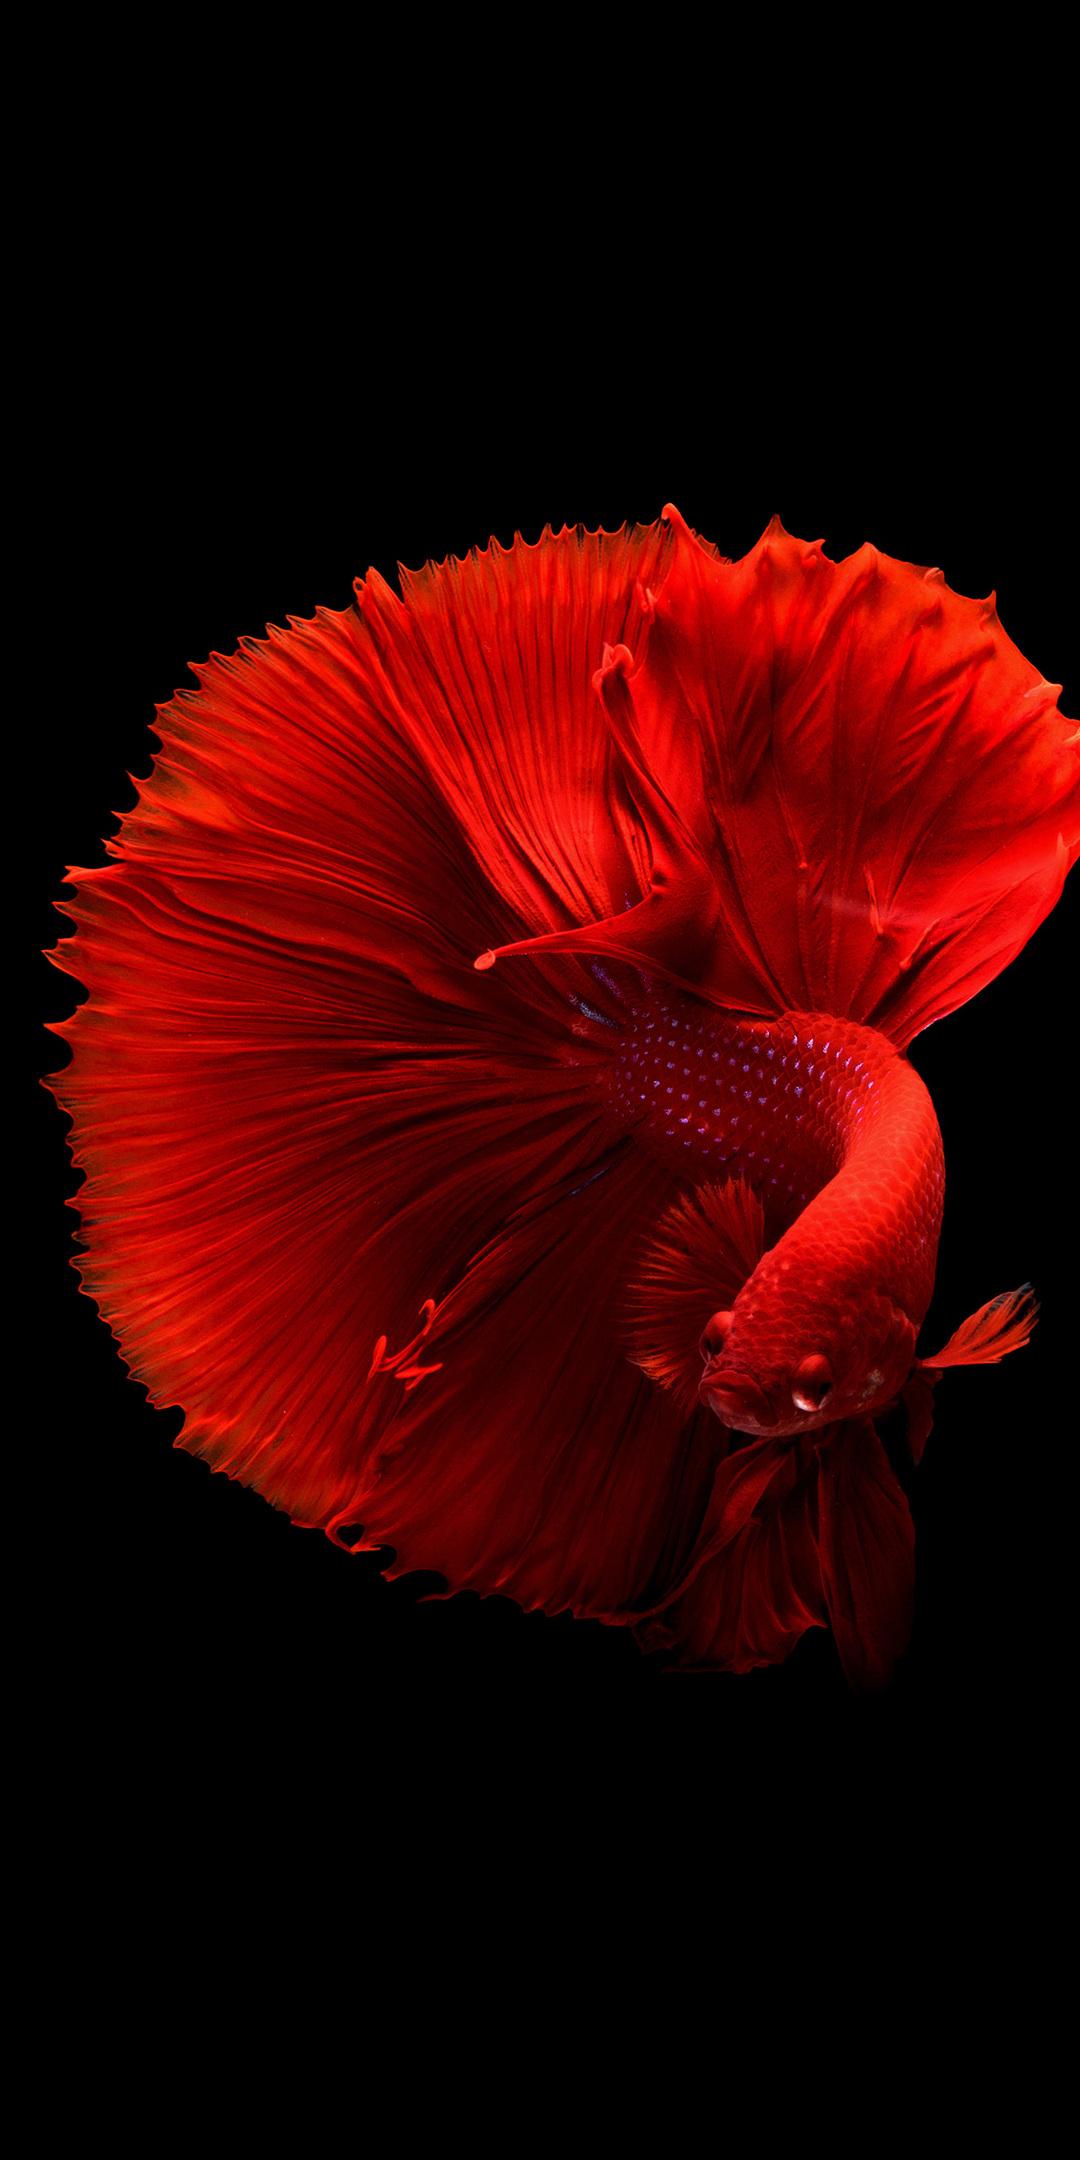 Siamese Fighting Fish 4k One Plus 5T, Honor 7x, Honor view